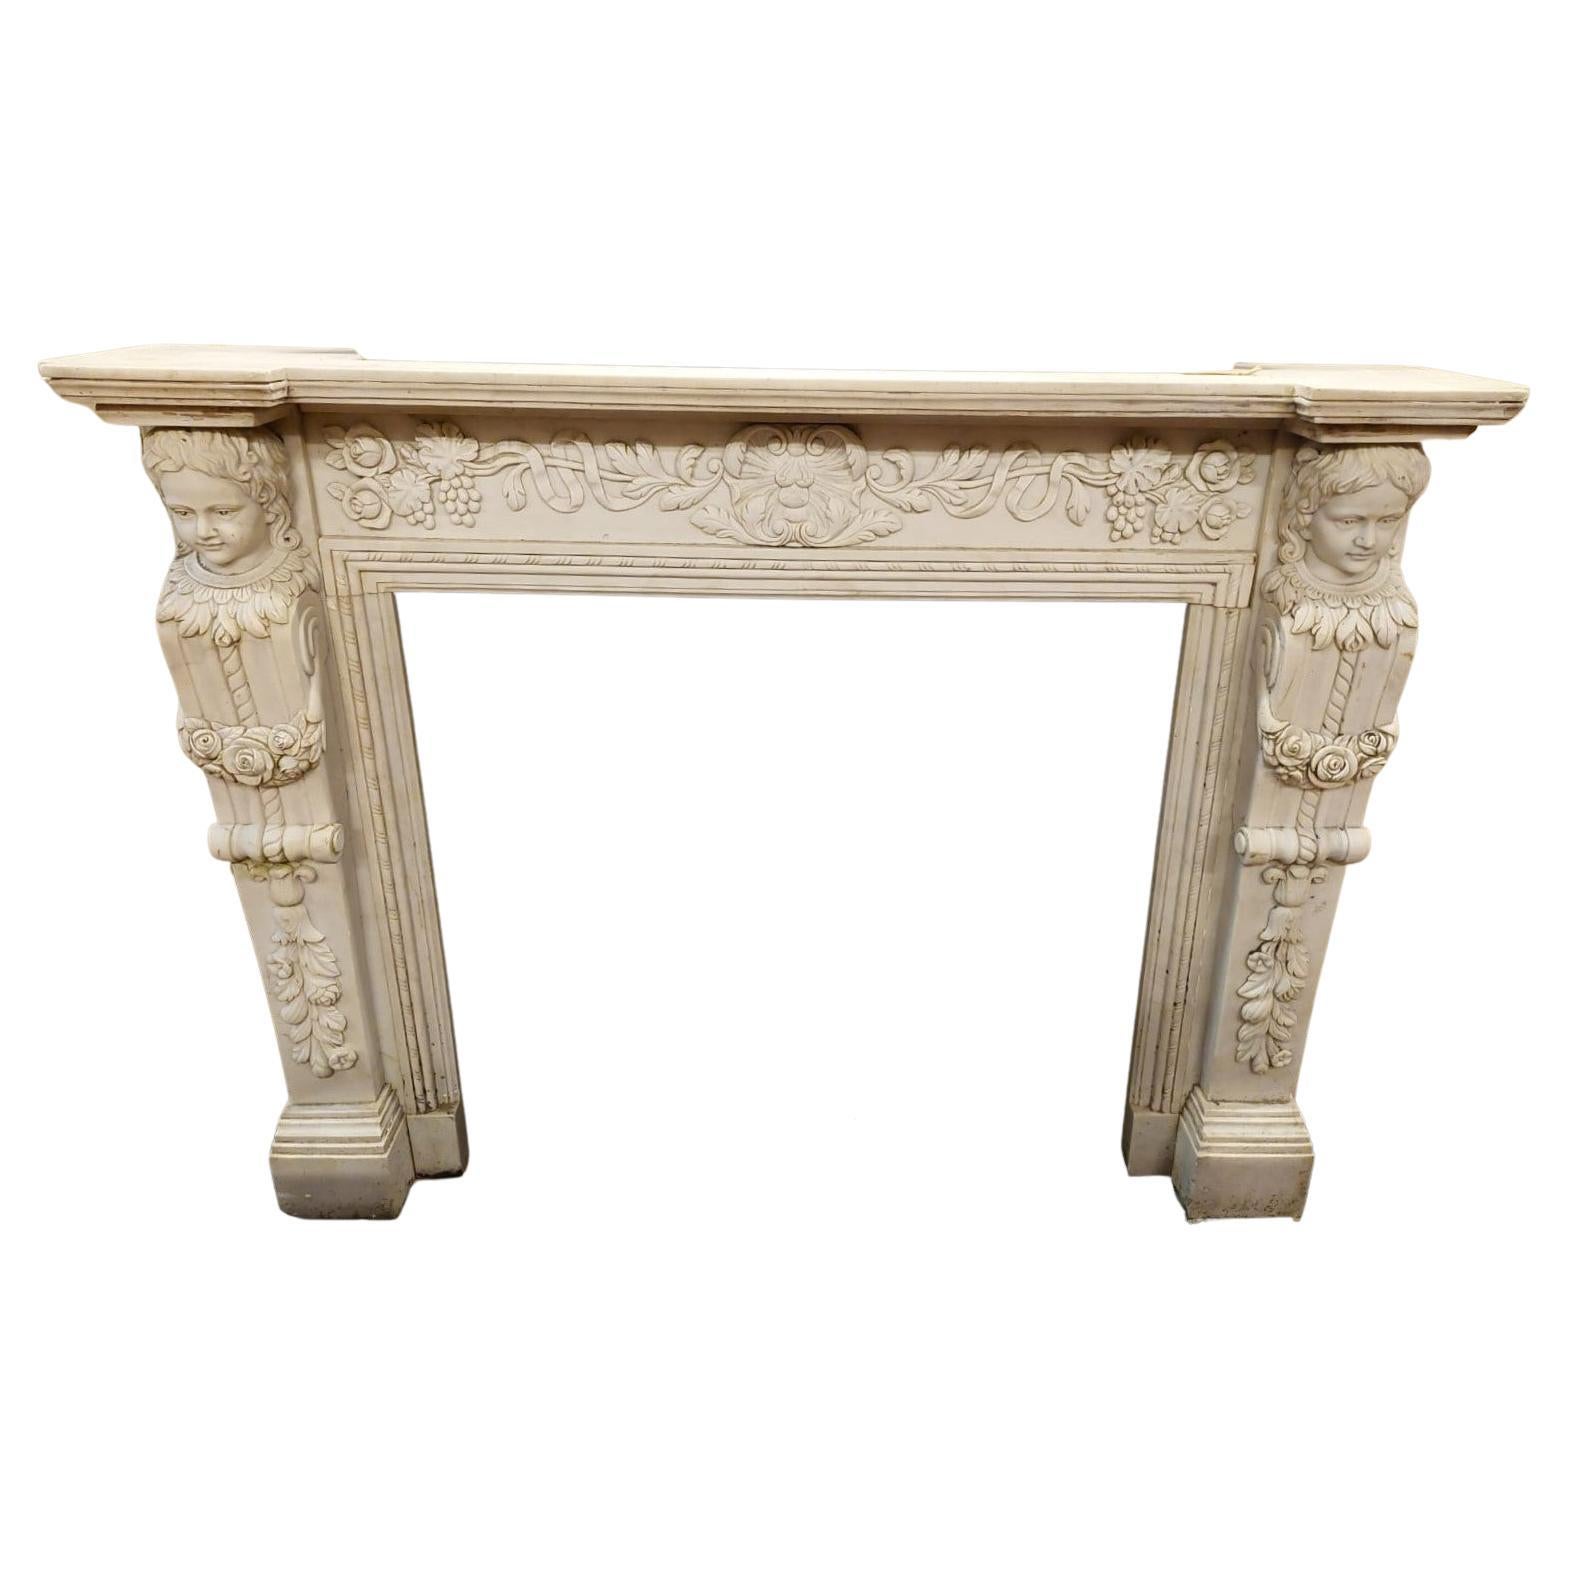 Antique White Carrara Marble Fireplace, Carved Caryatids, 19th Century Italy For Sale